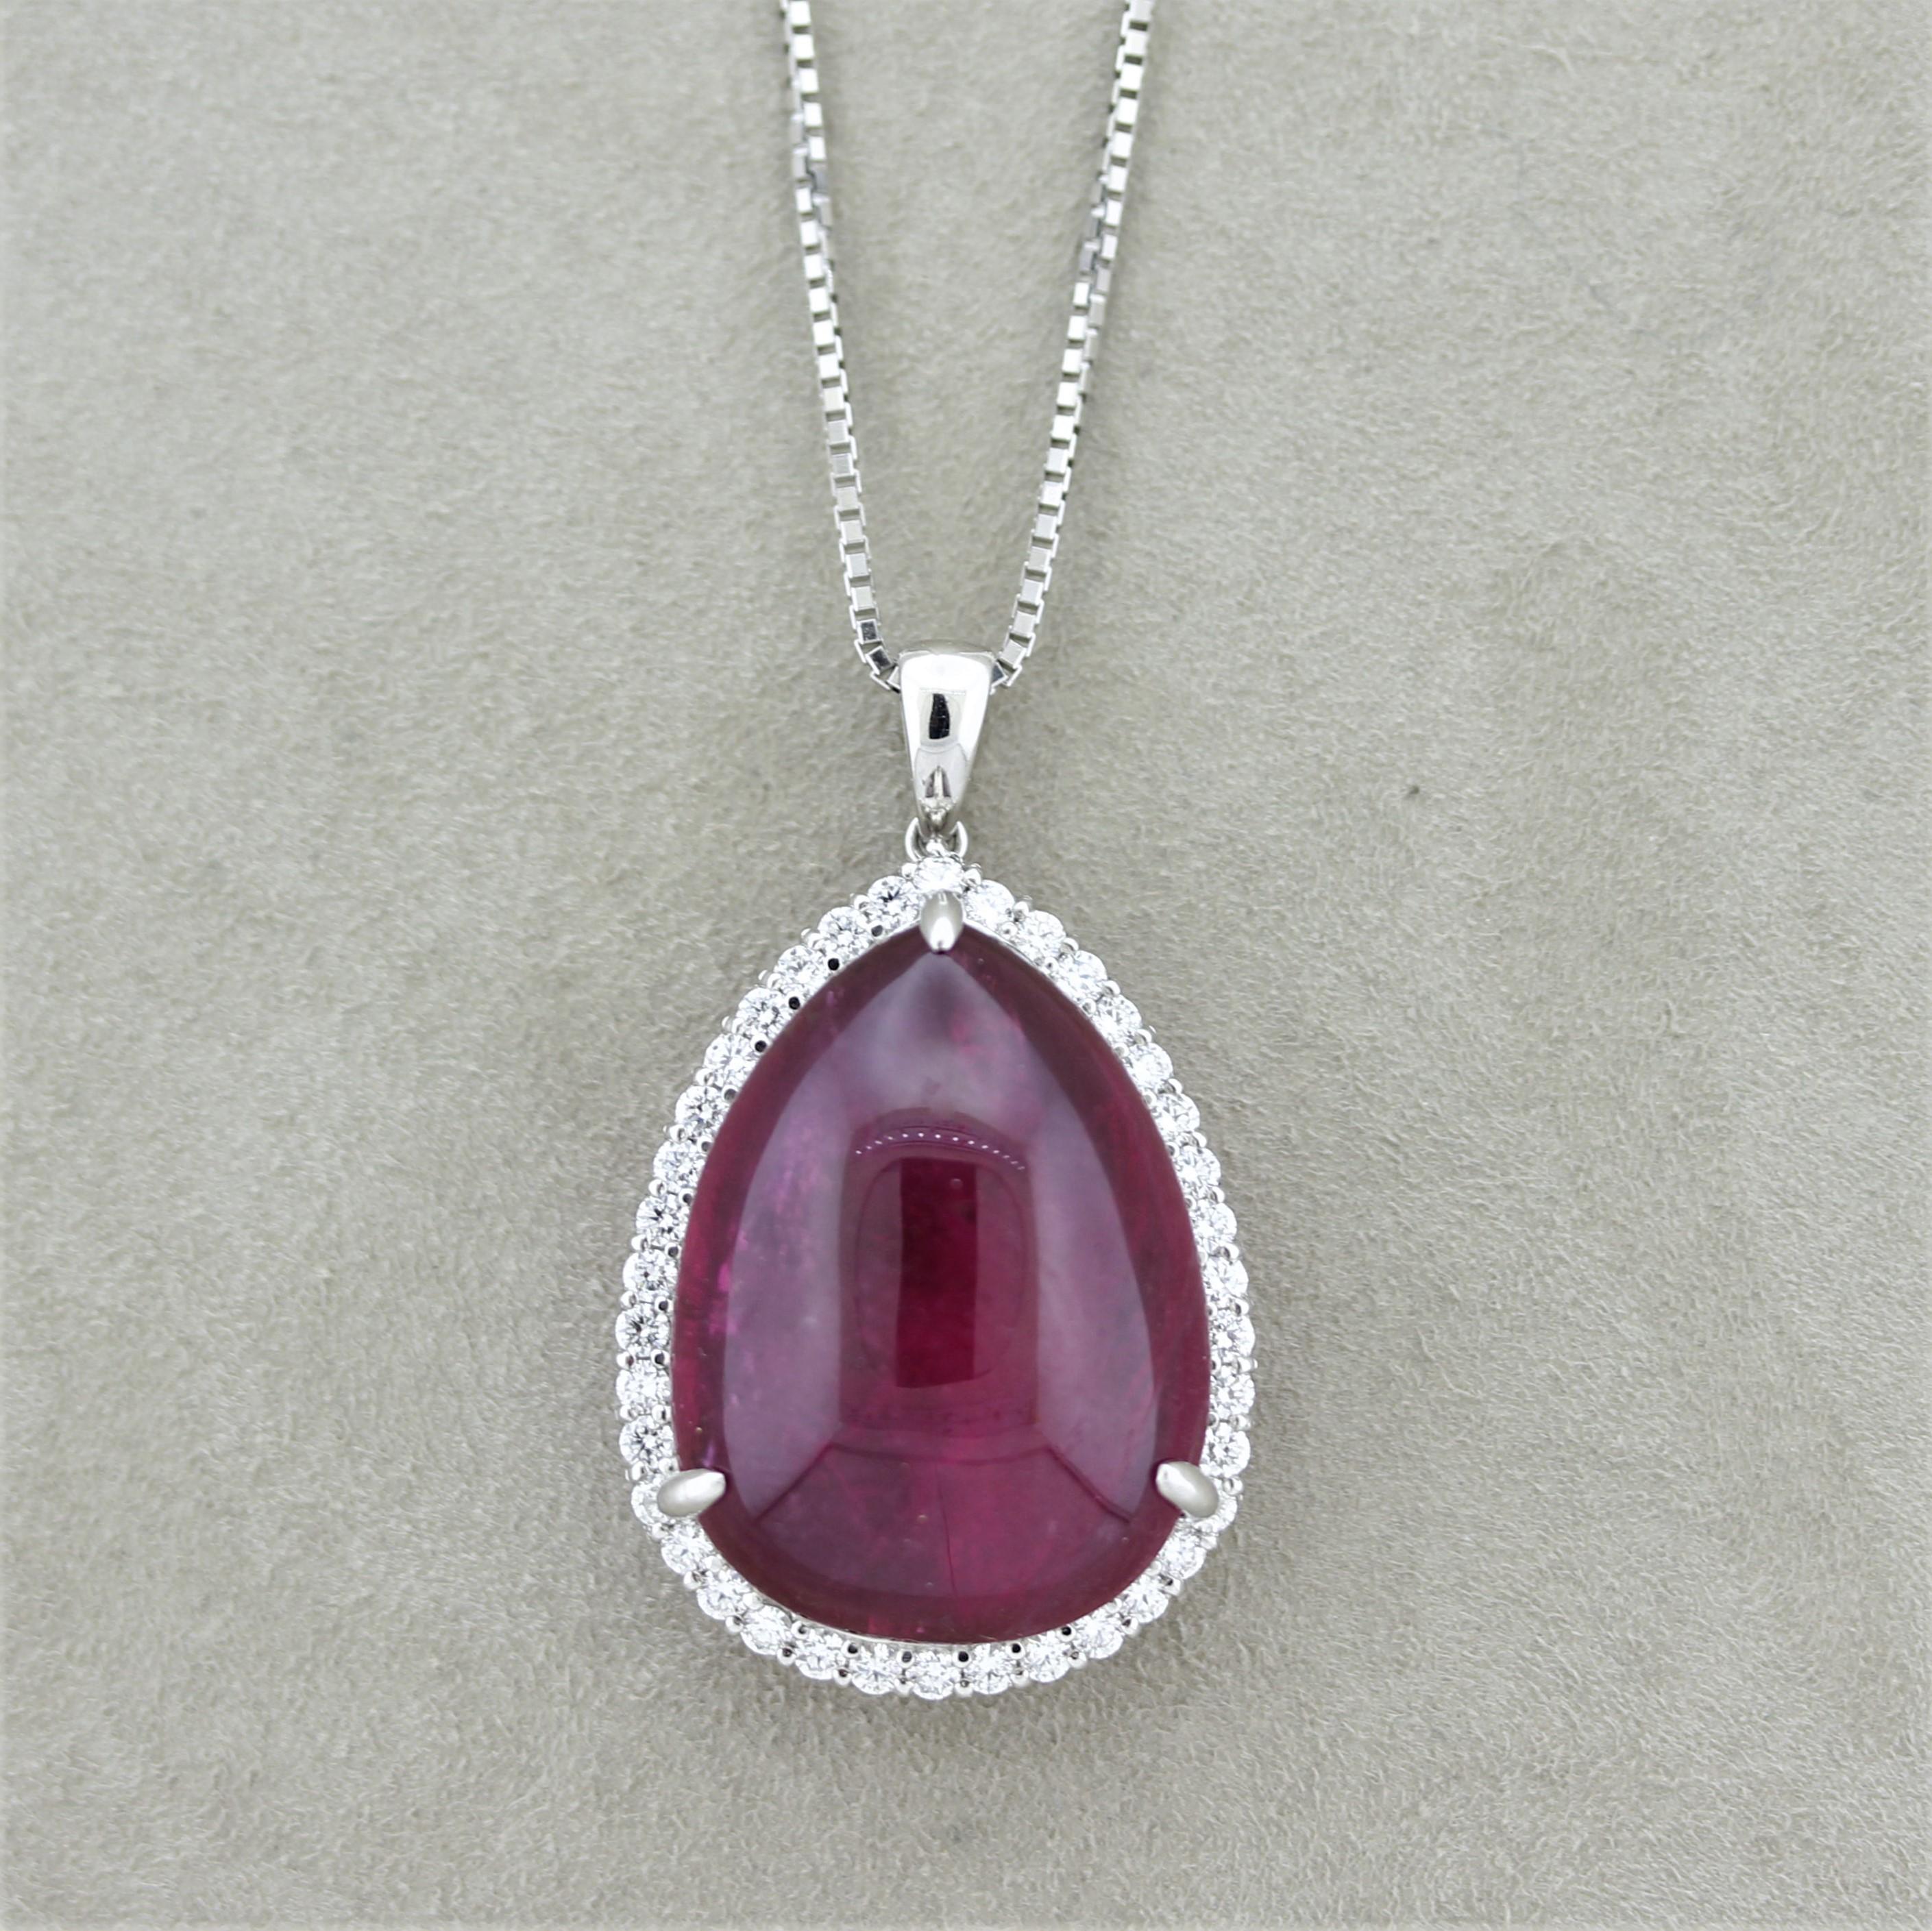 A large and impressive rubellite tourmaline takes center stage of this platinum made pendant. It weighs 27.04 carats and has a rich royal slightly pinkish-red color giving it the name rubellite. It is complemented by 0.76 carats of round